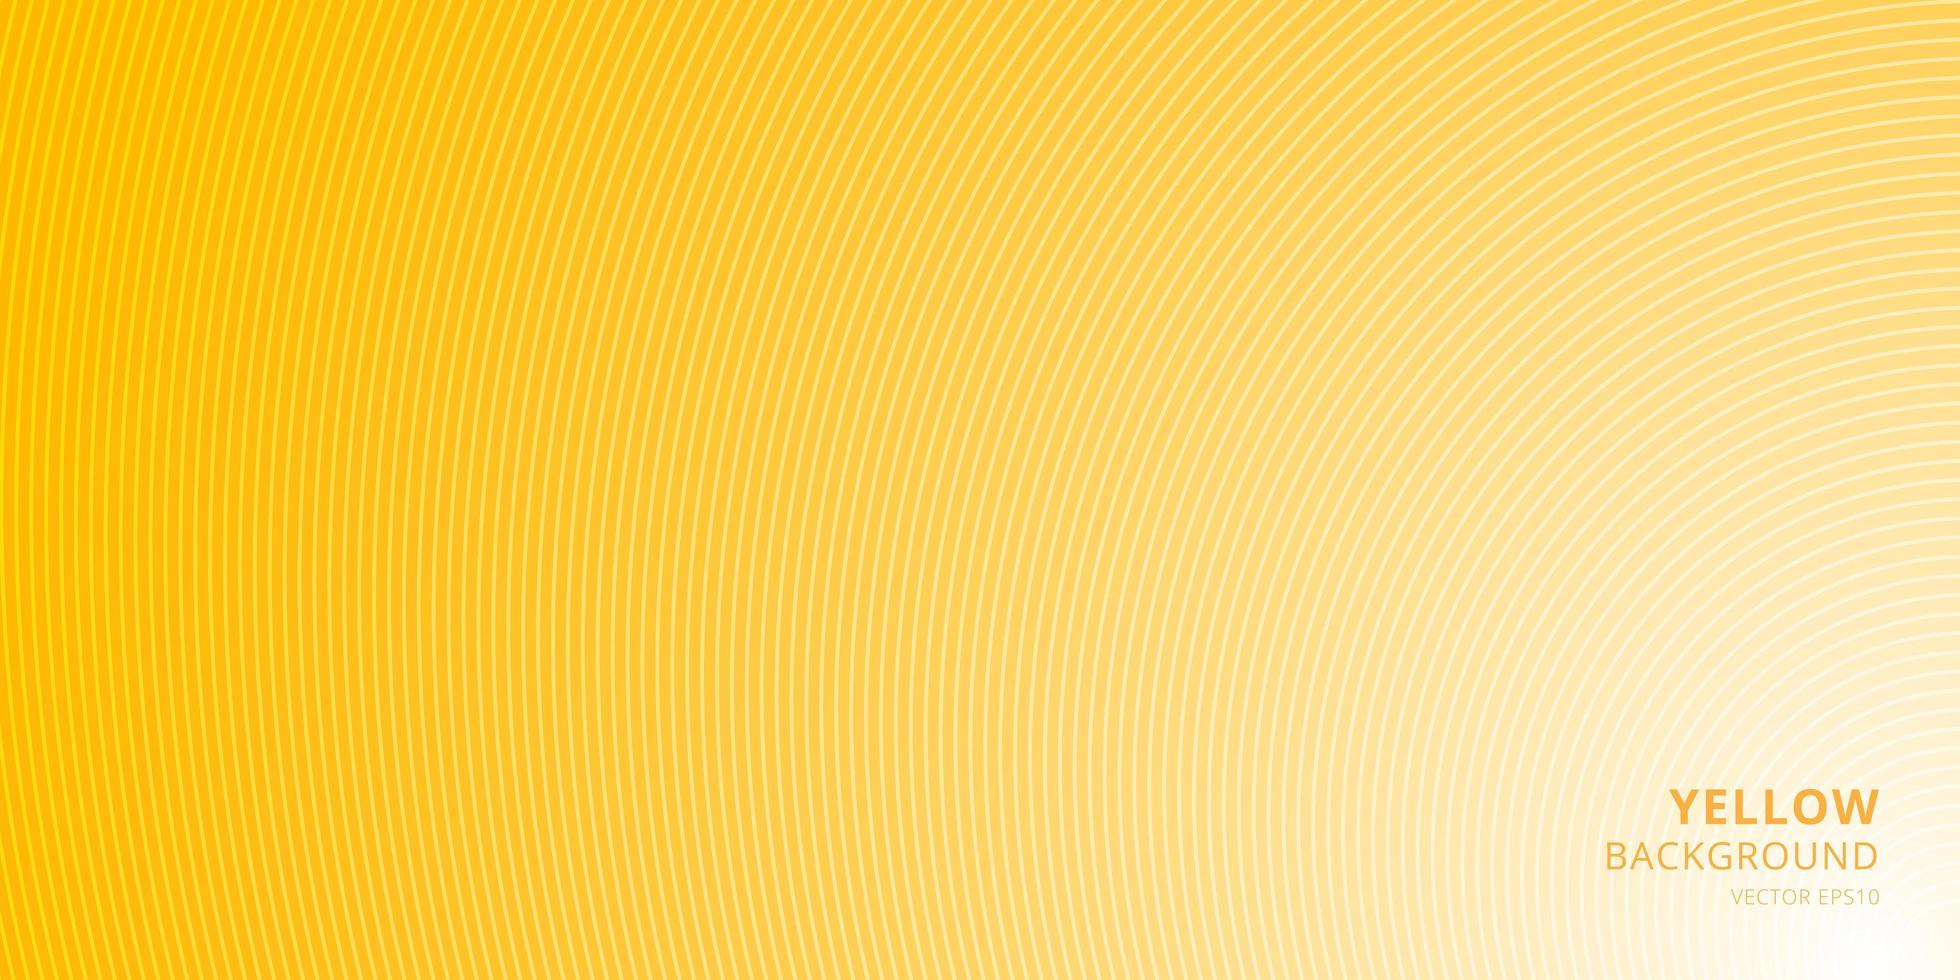 Smooth light yellow background curved lines pattern texture vector